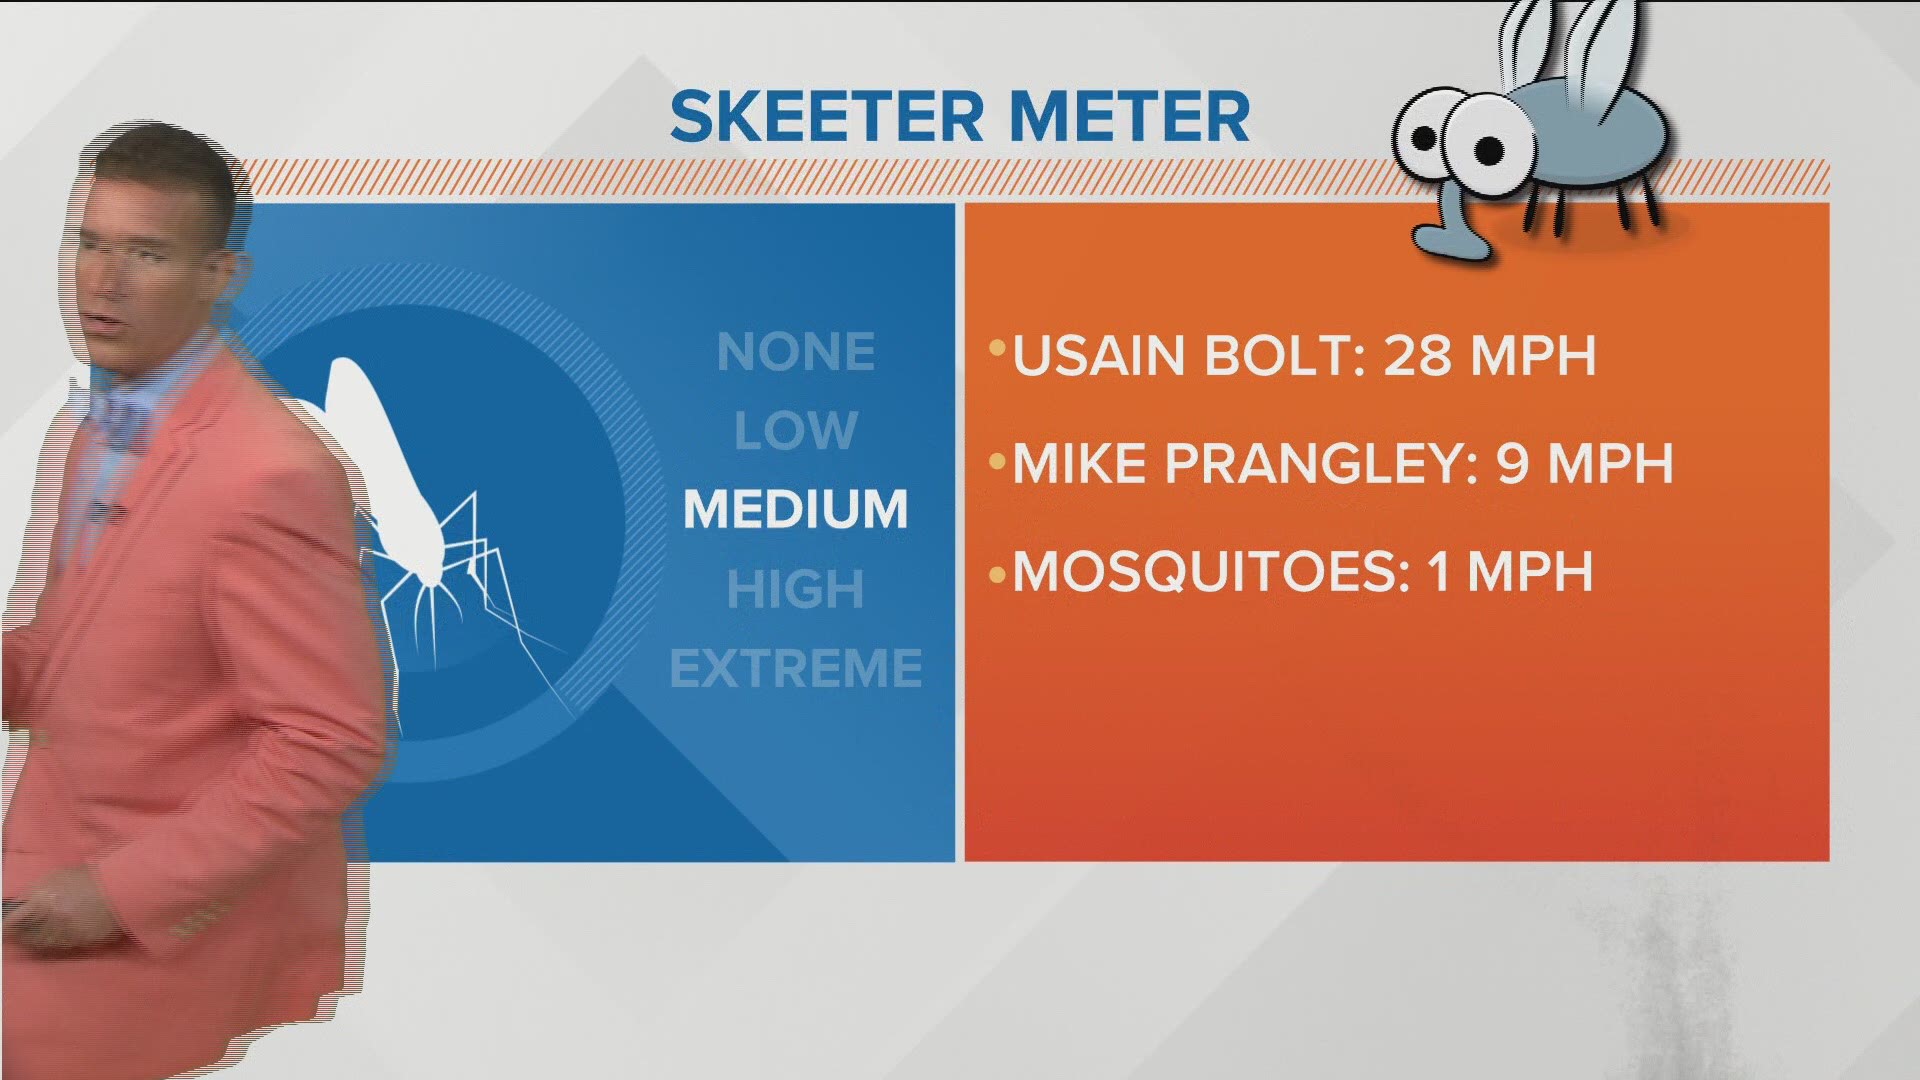 Mosquitoes are slow fliers and with more wind in the forecast this will help lower the skeeter meter to the moderate range.